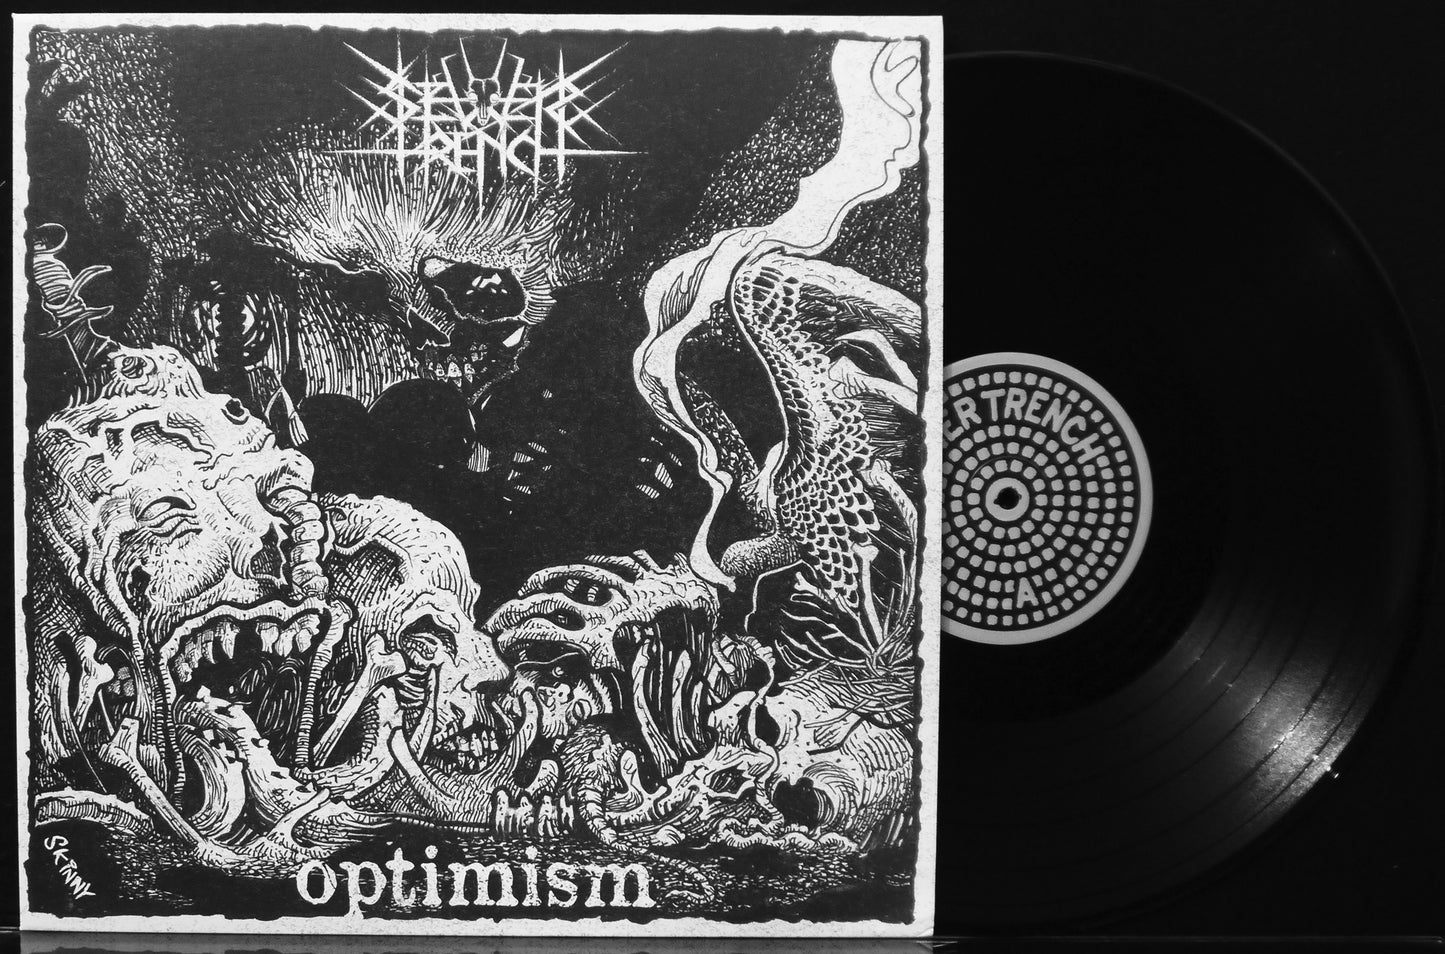 SEWER TRENCH - Optimism 12"